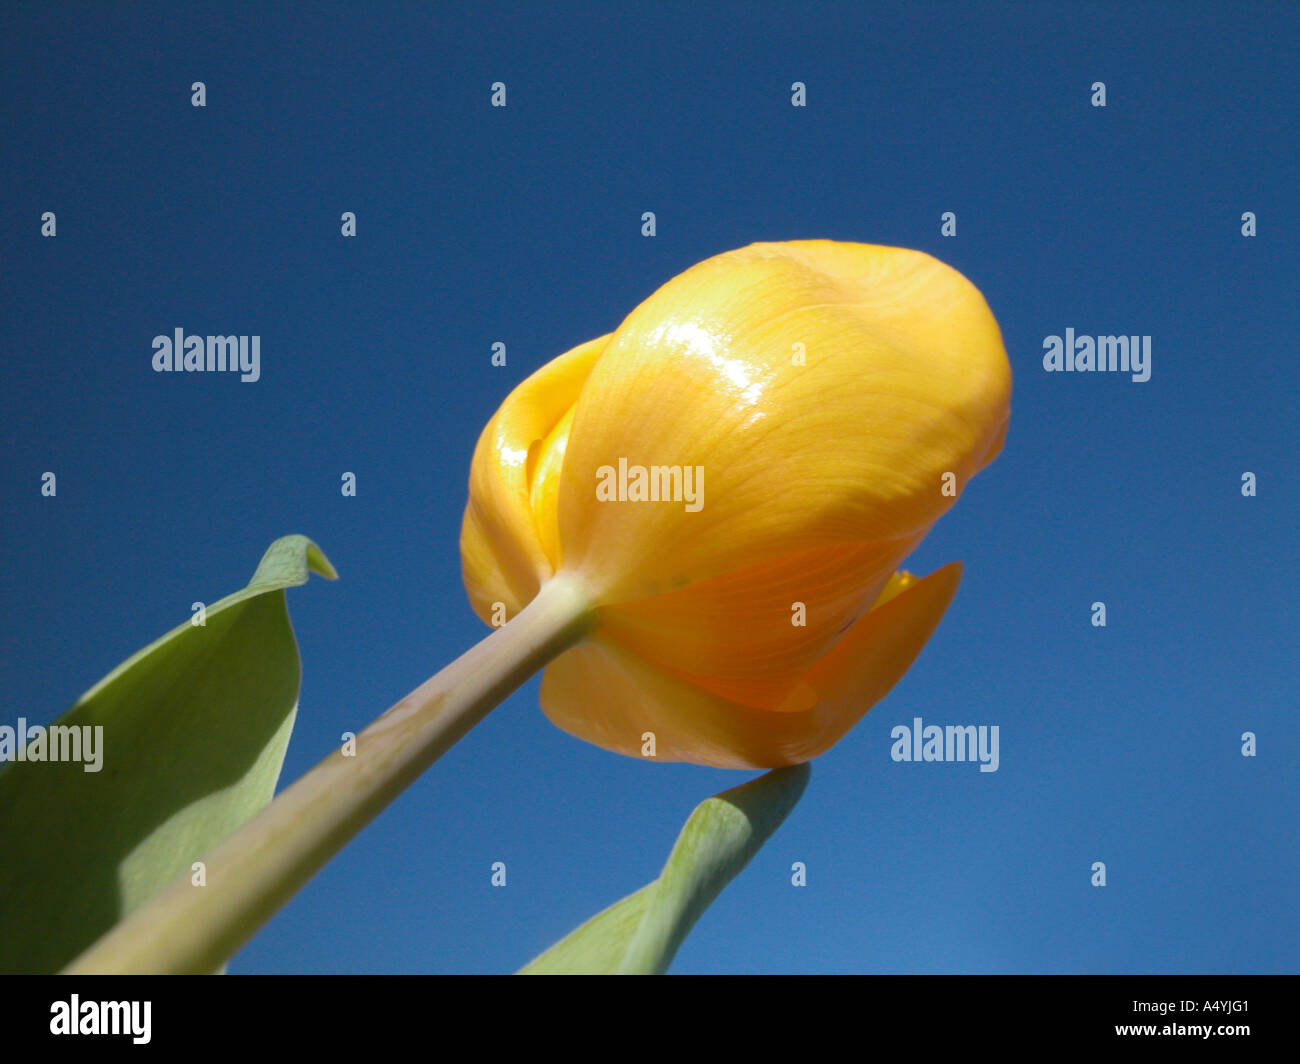 Yellow tulip in front of blue sky Stock Photo